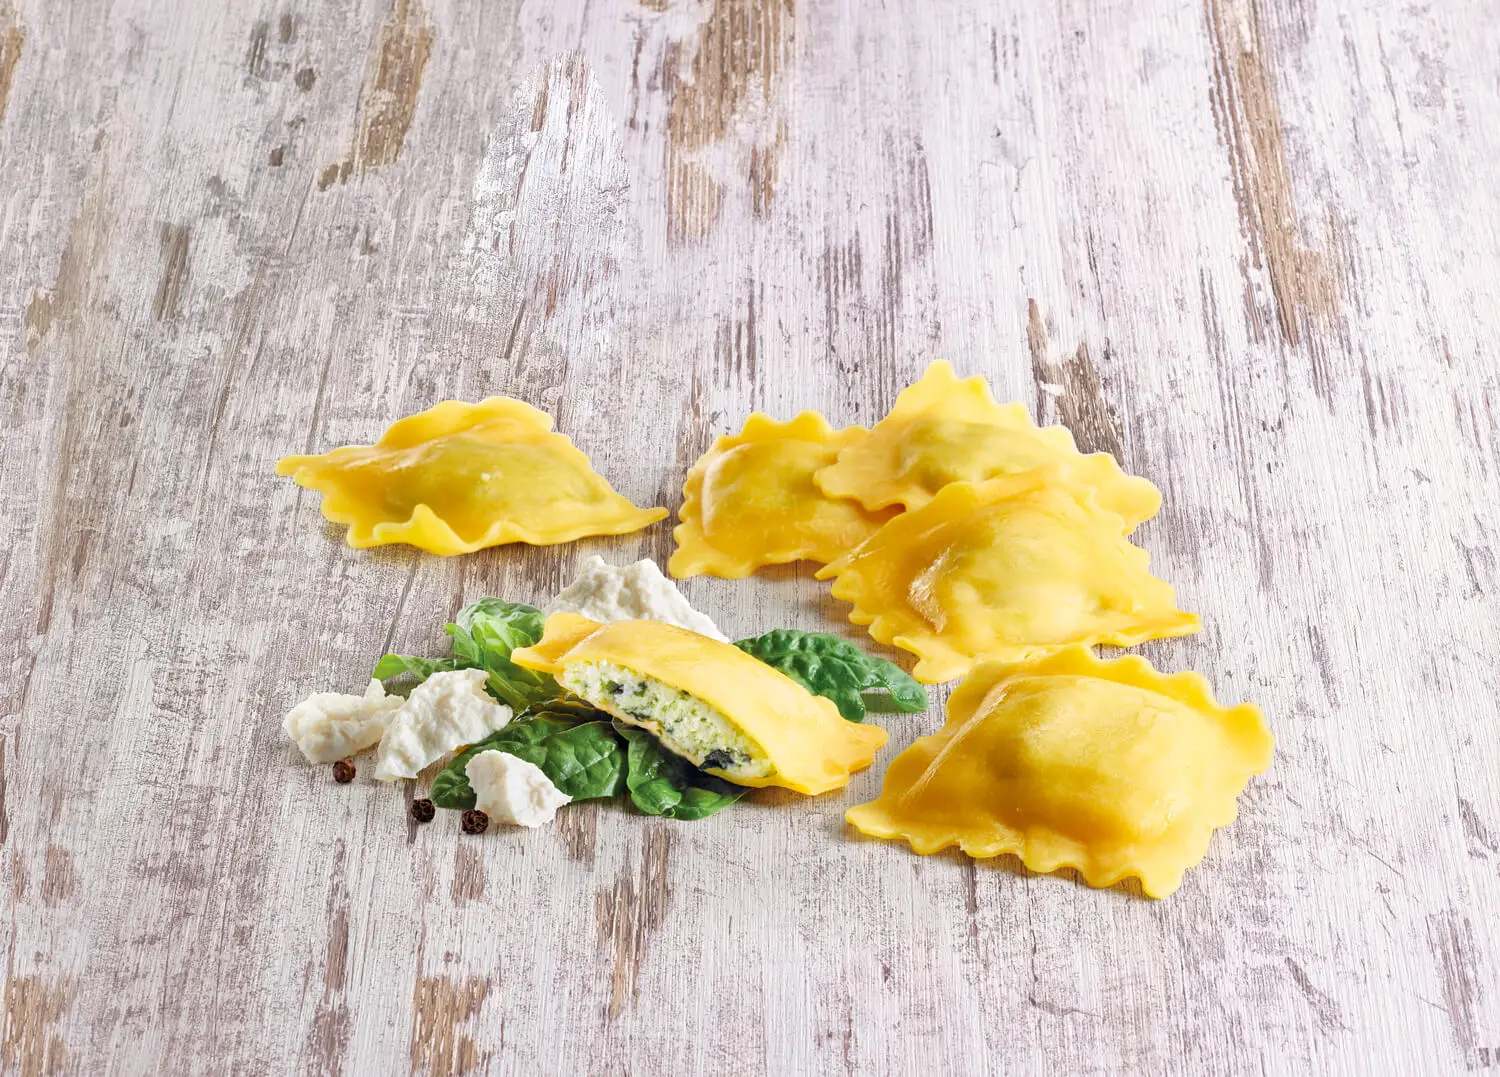 Ravioloni with ricotta cheese and spinach